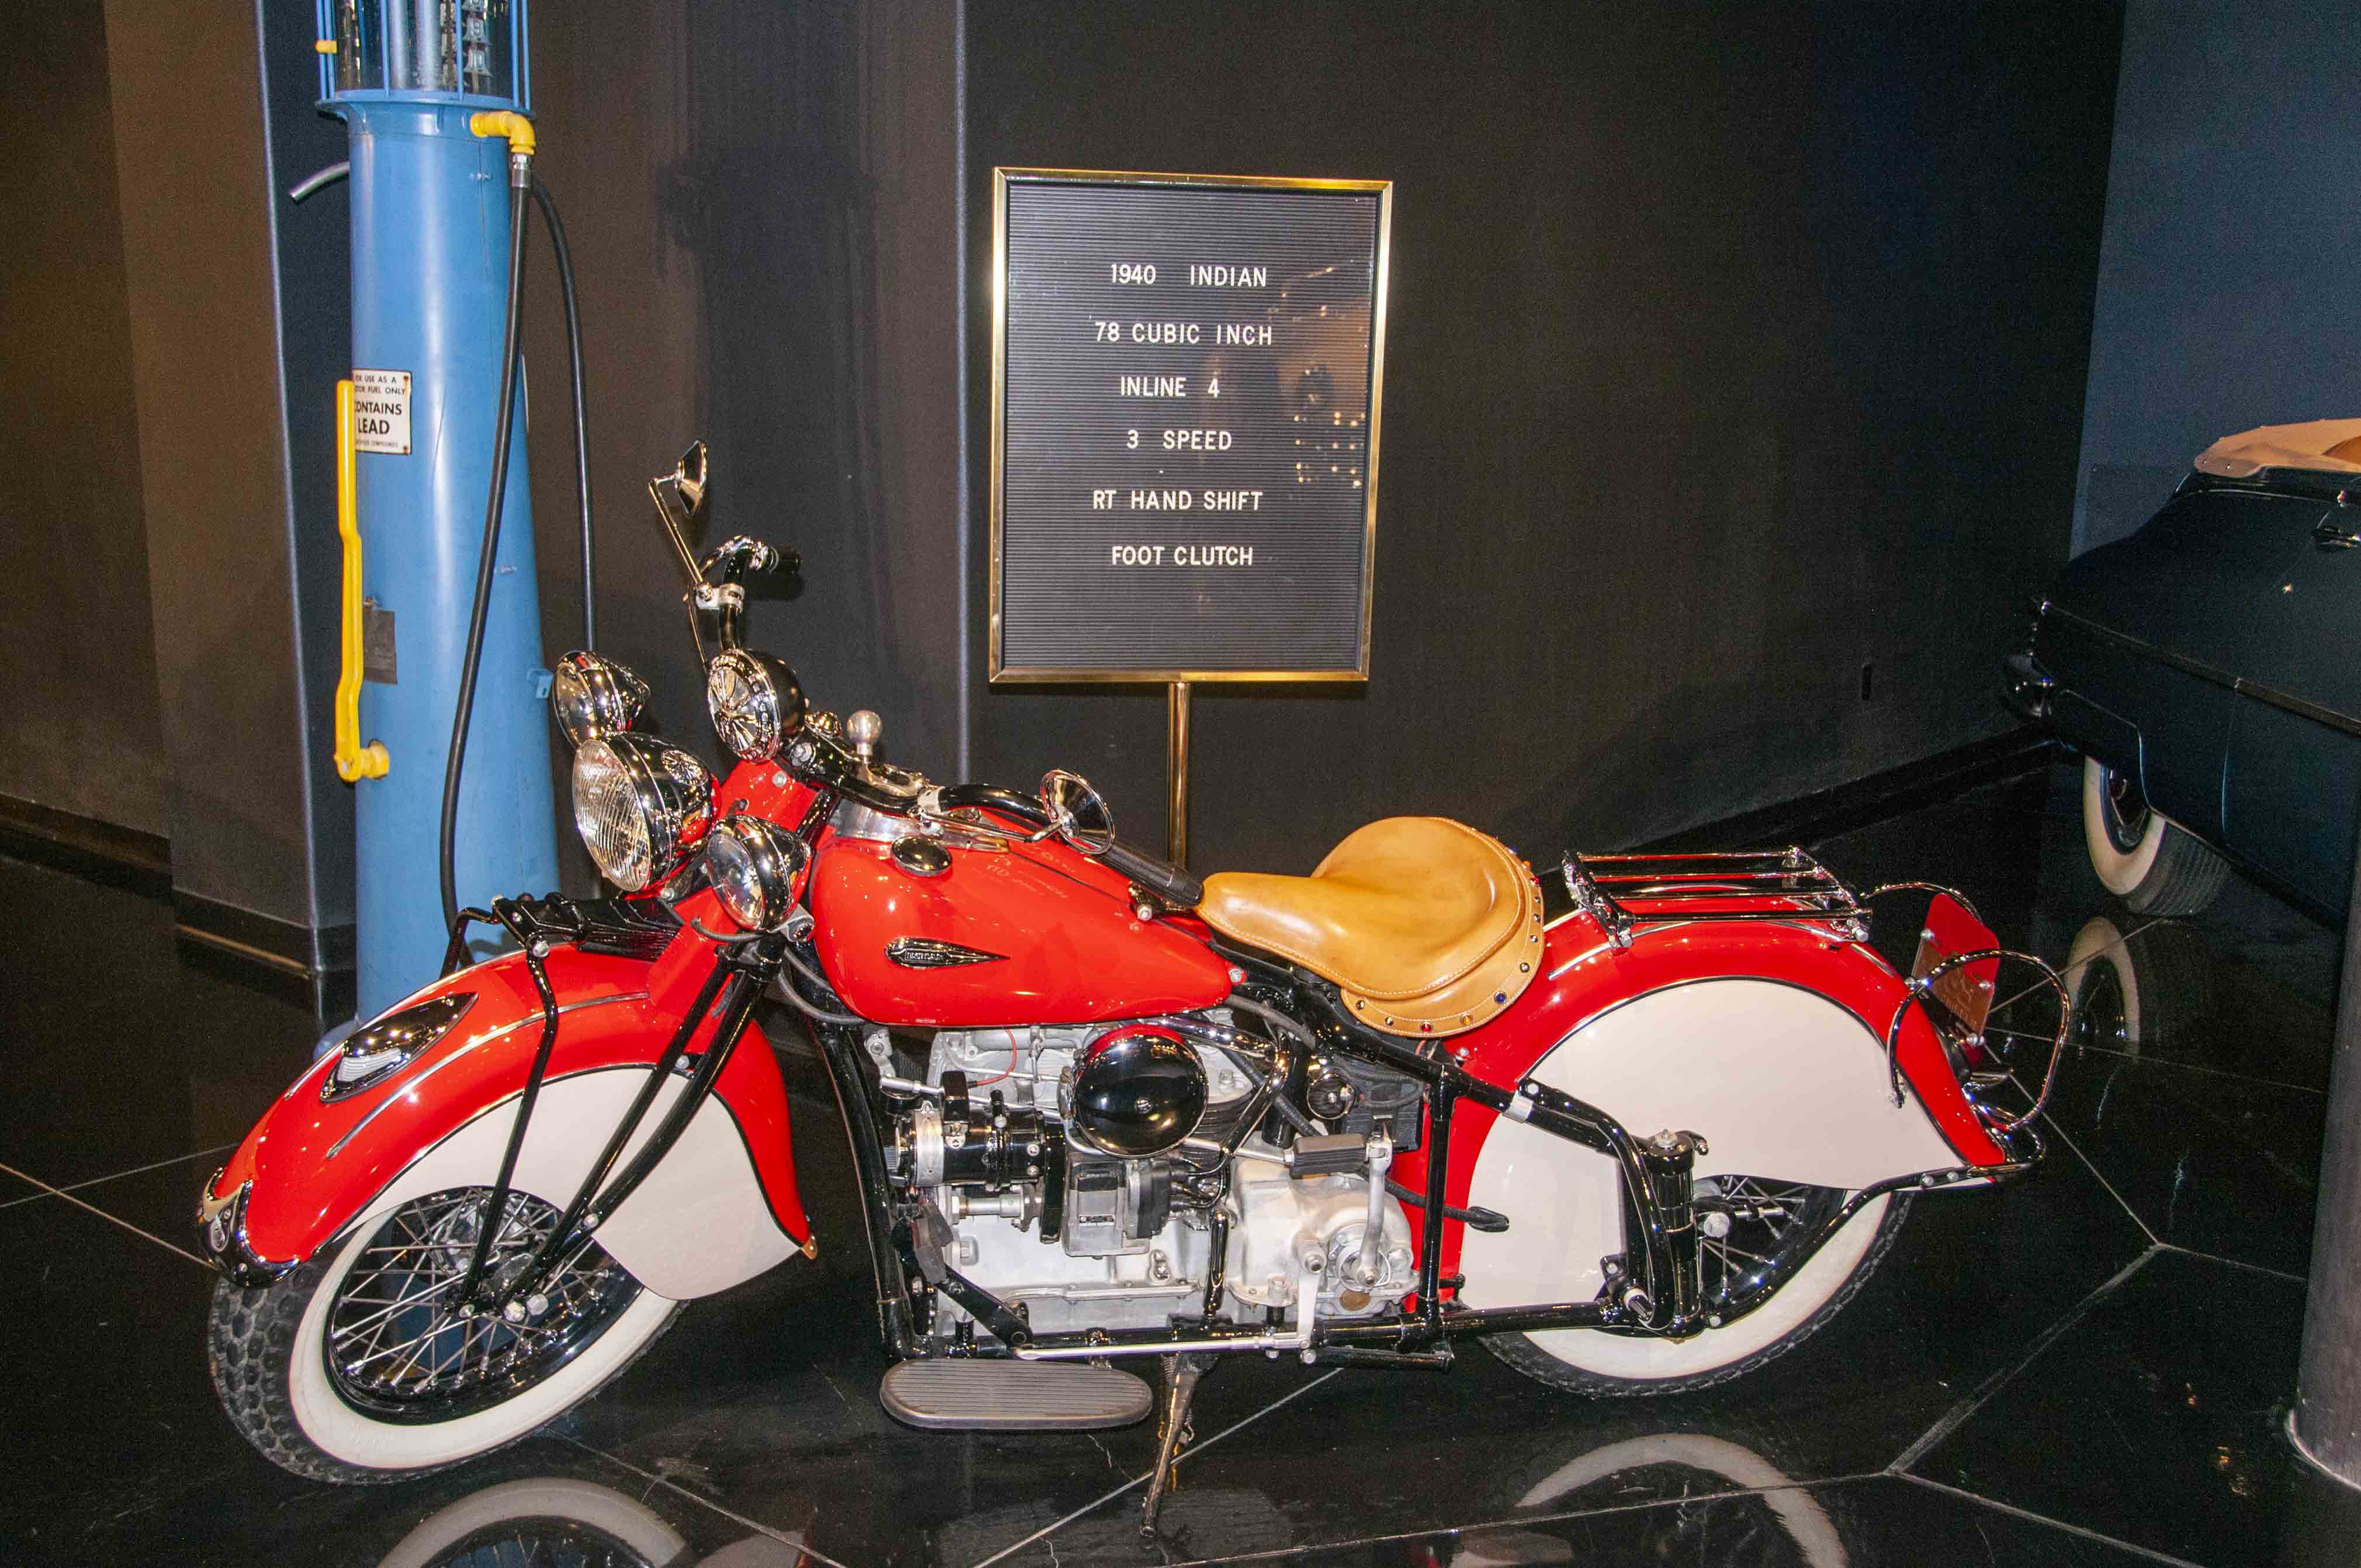 1940 Indian Motorcycle